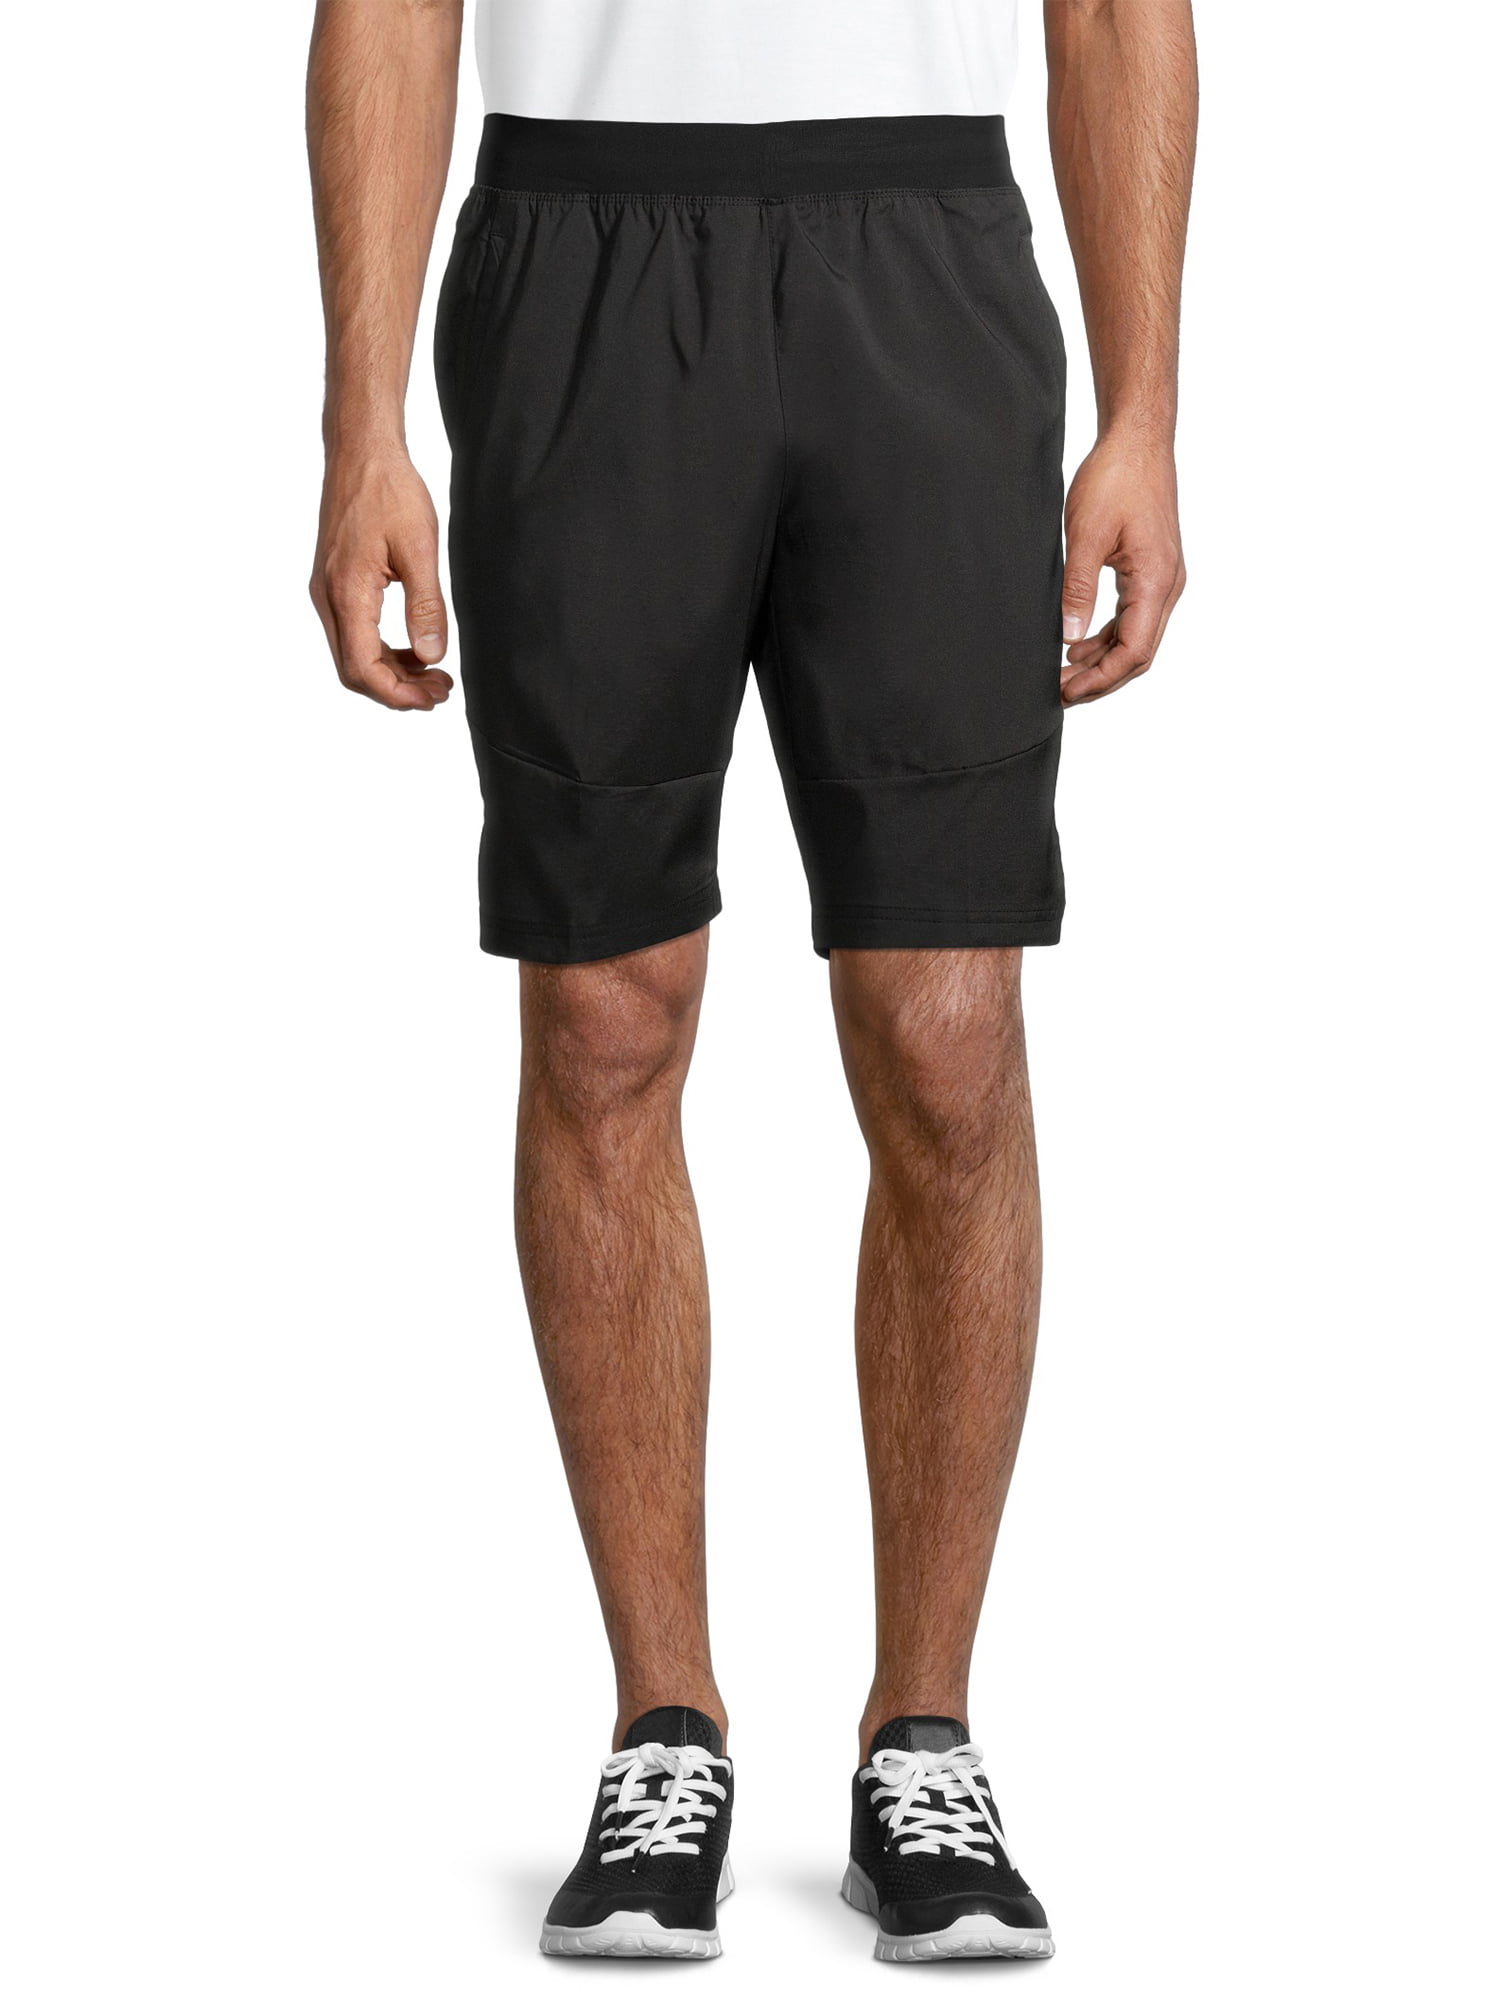 Apana Men's Woven Stretch Athletic Shorts 